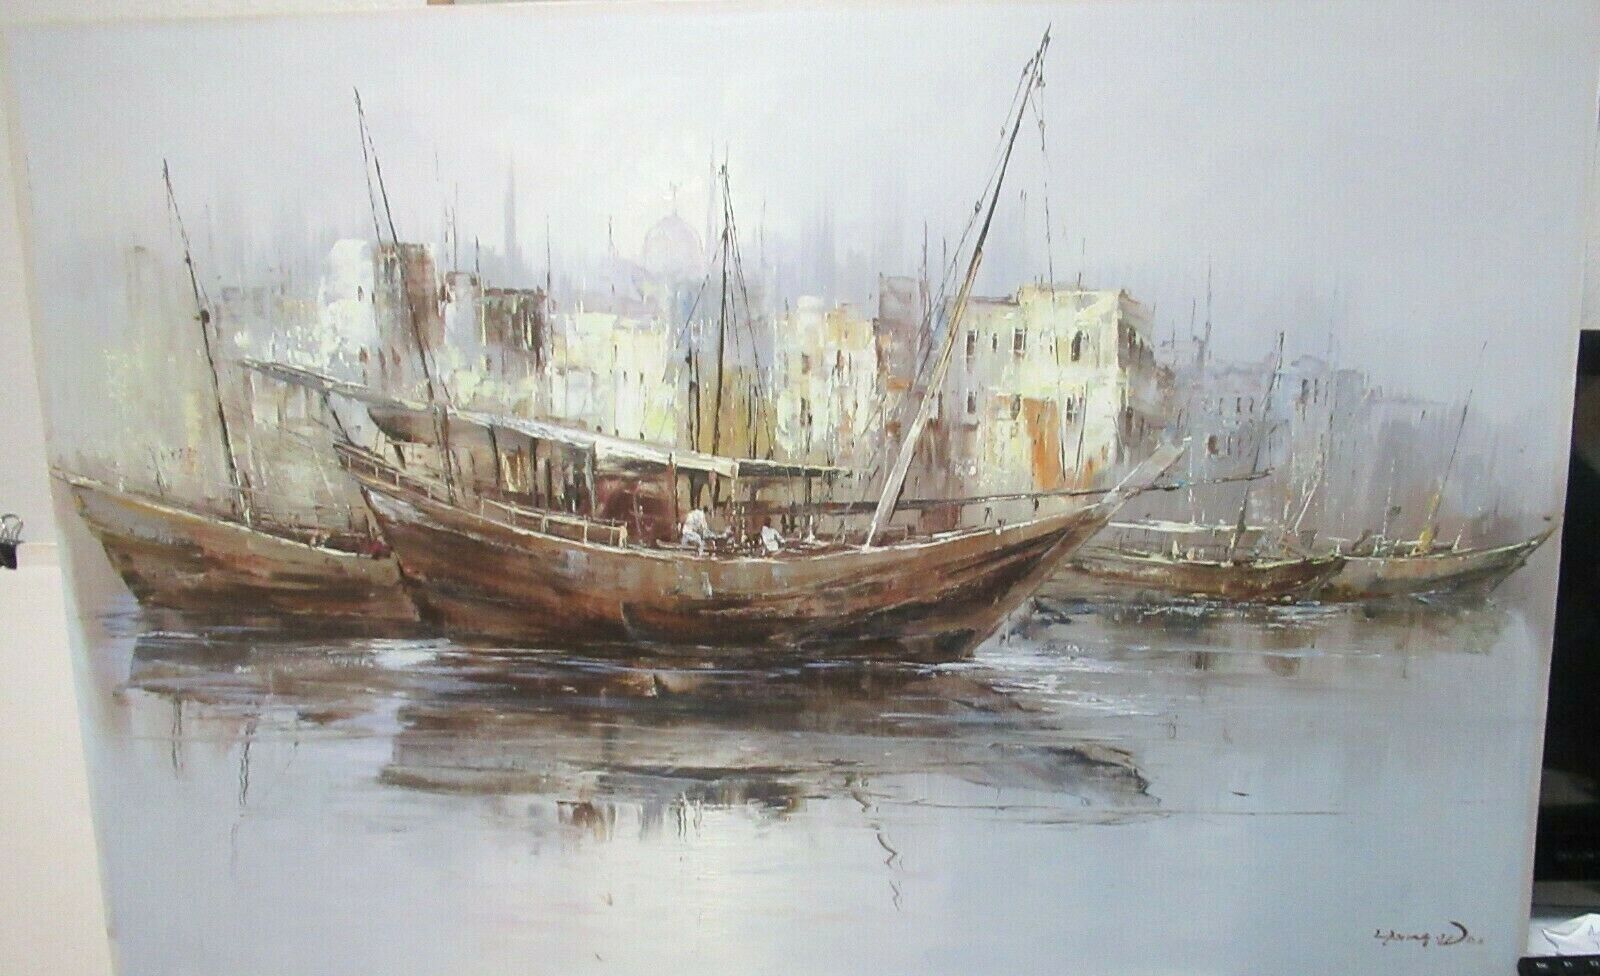 YOUNG WOO CHINESE FISHING PORT SCENE LARGE ORIGINAL OIL ON CANVAS PAINTING